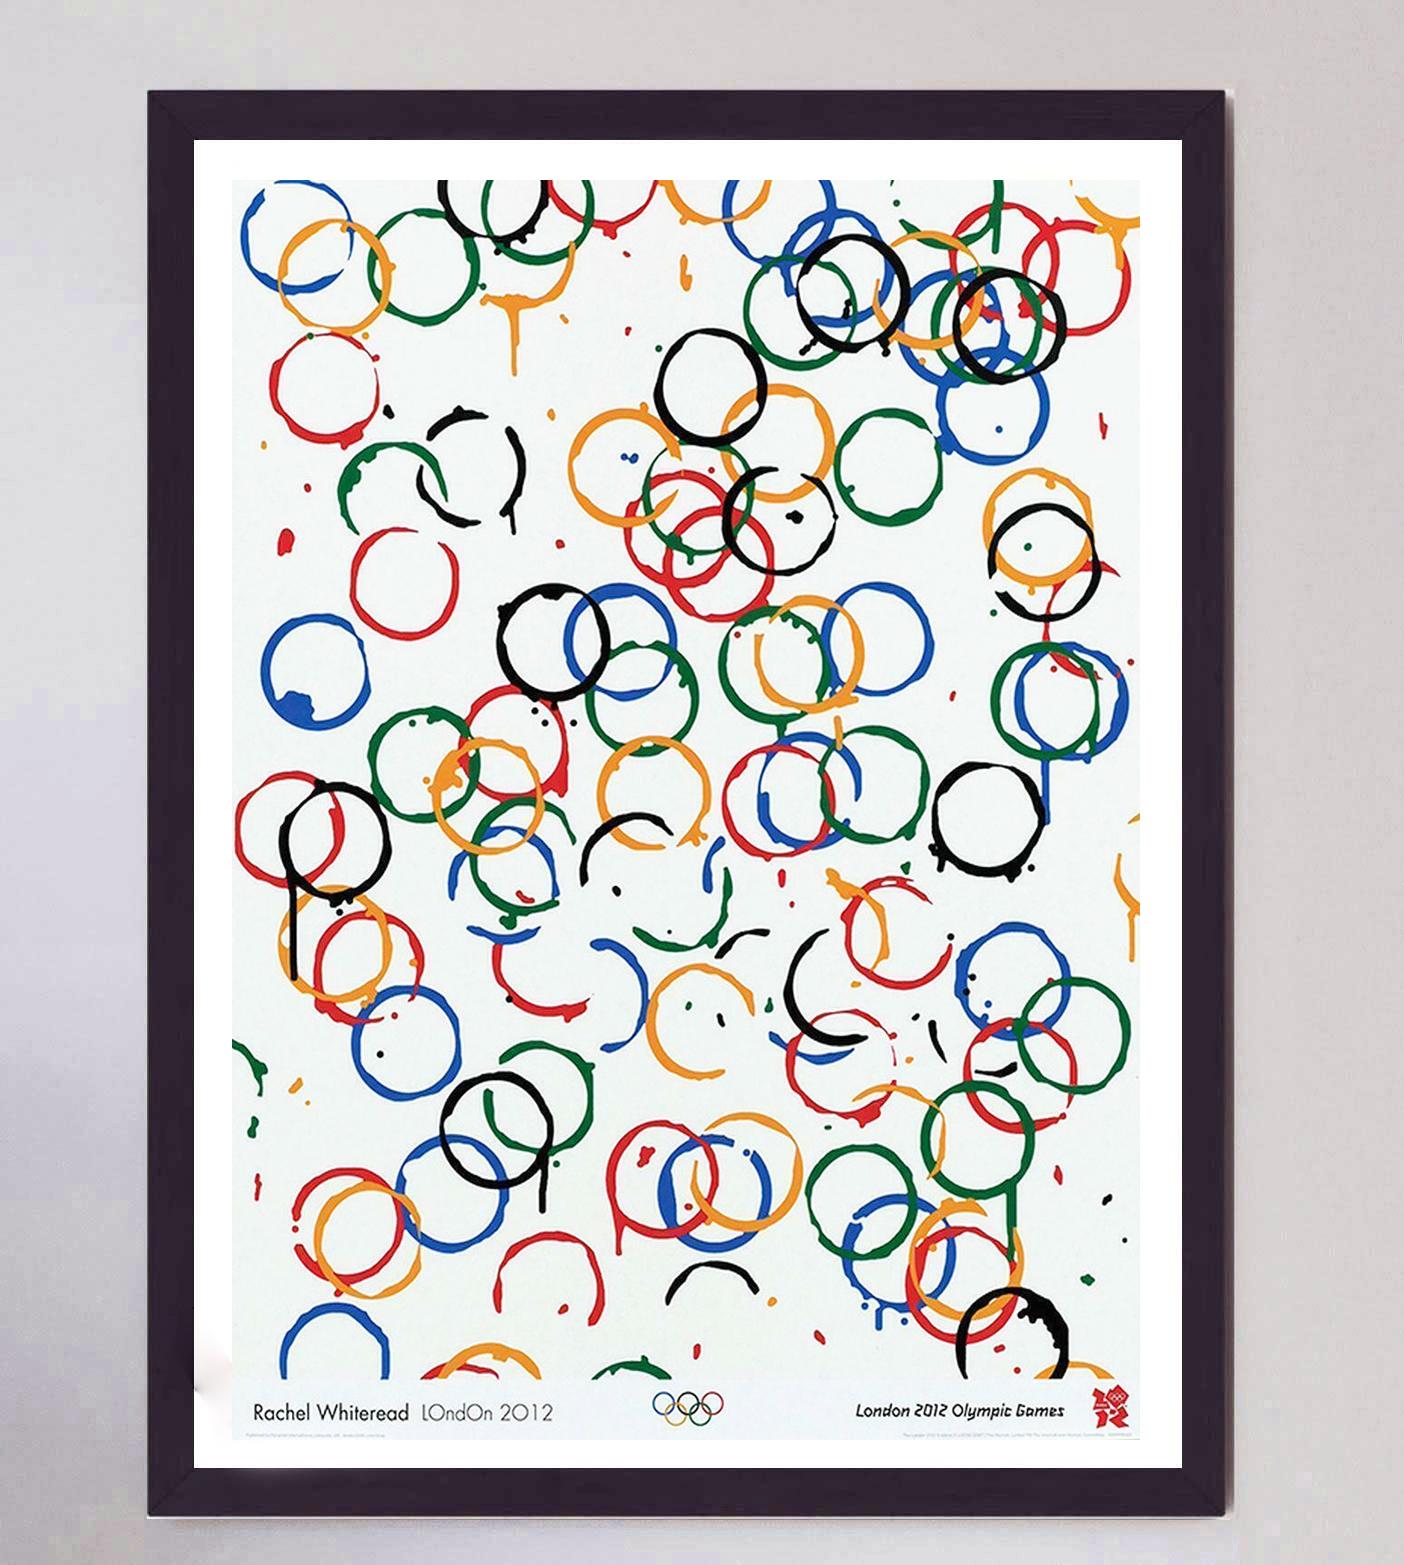 English 2012 London Olympic Games - Rachel Whiteread Original Vintage Poster For Sale